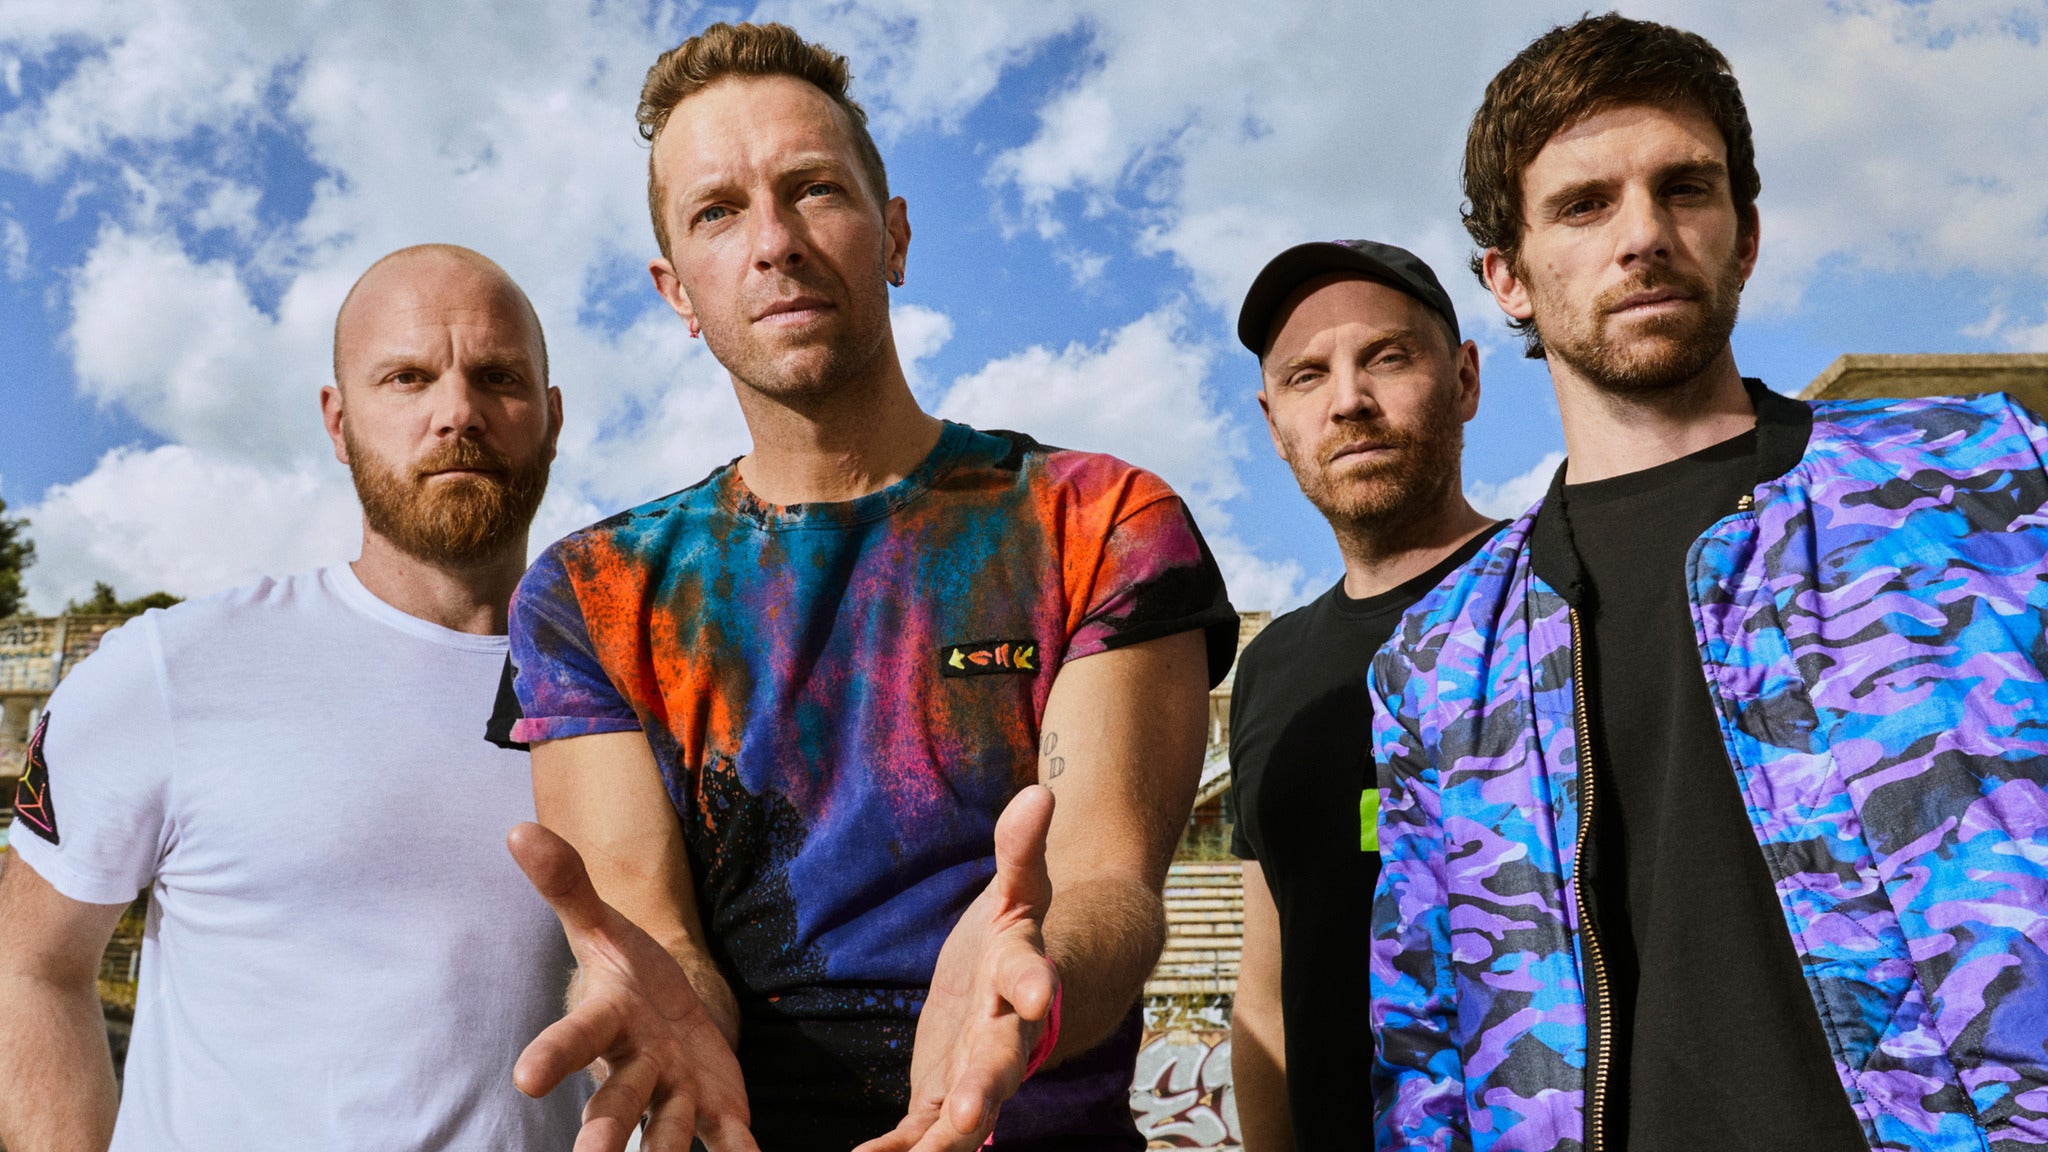 Coldplay - MUSIC OF THE SPHERES WORLD TOUR at NRG Stadium